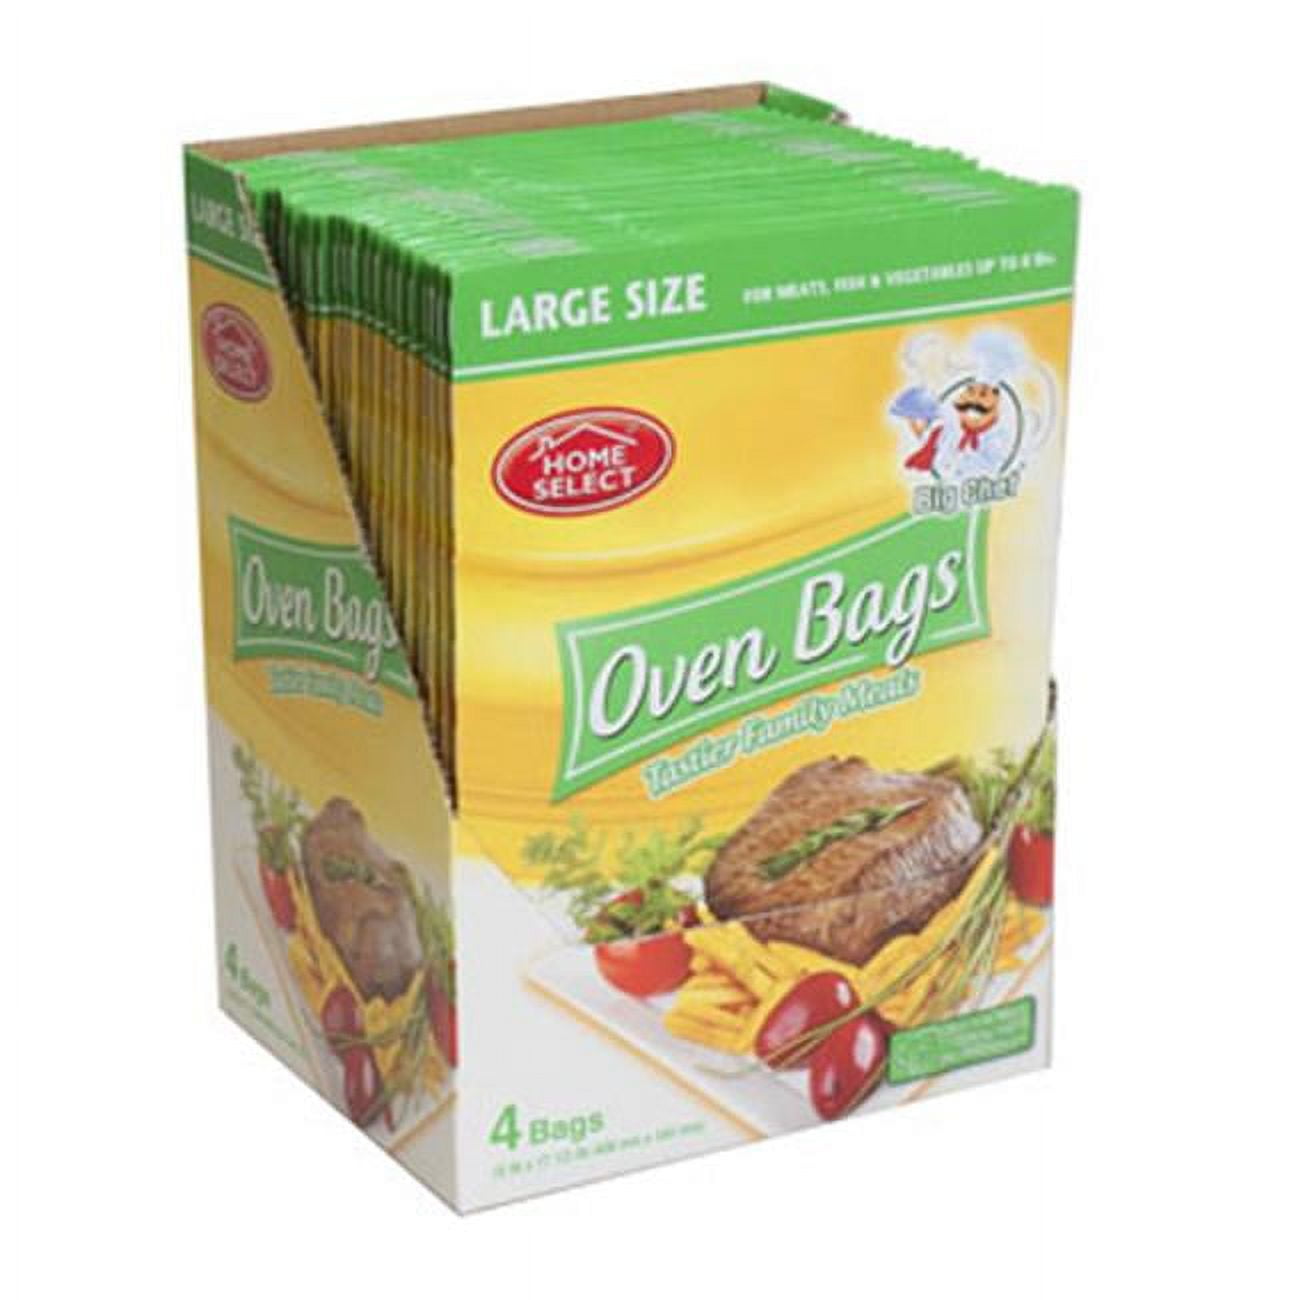 Home Select Oven Bags Large Size 16 Inch x 175 Inch 4 Bags for